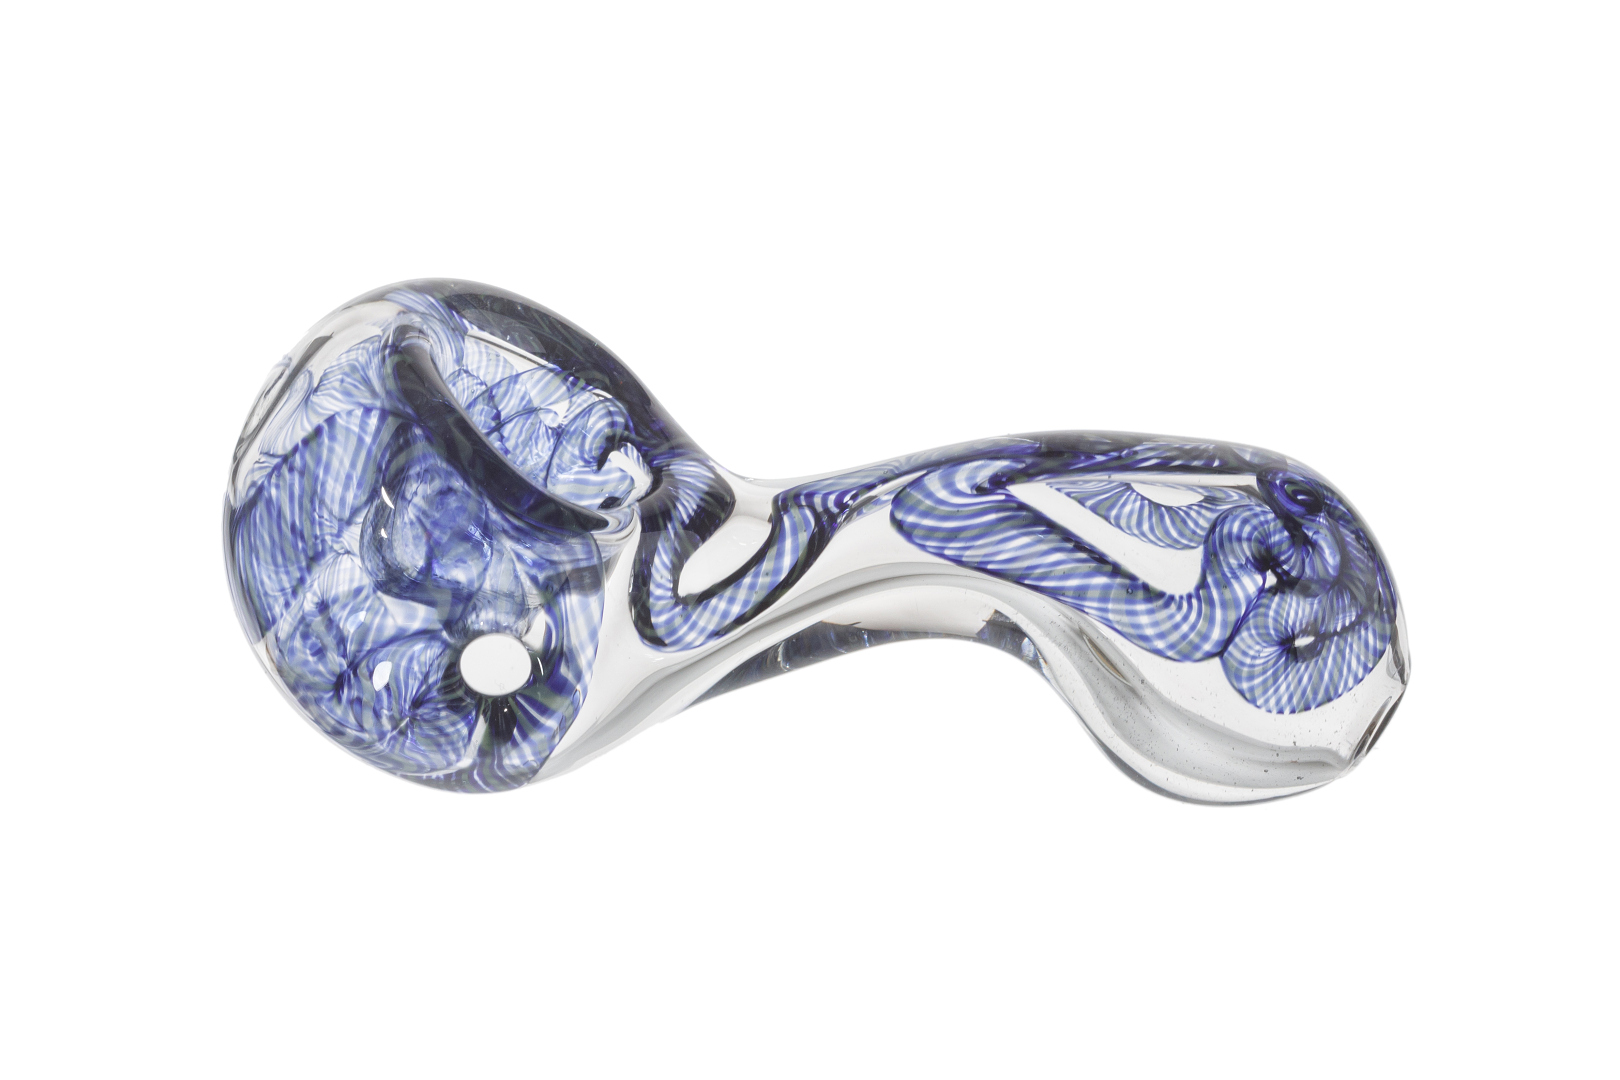 Unique glass pipes Long glass color changing smoking spoon pipe Relaxation Glass smoking pipe